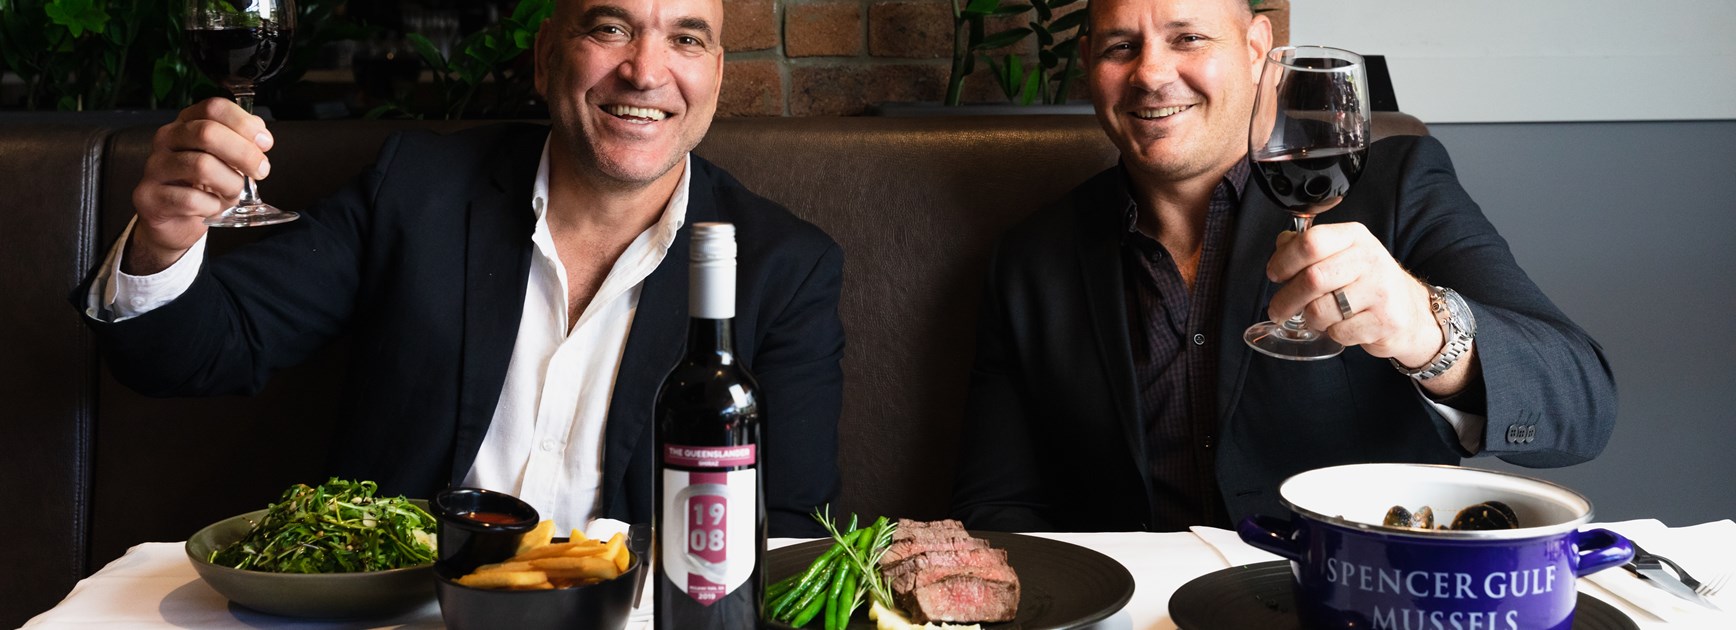 QRL launch a new range of wines to ‘unite, excite and inspire’